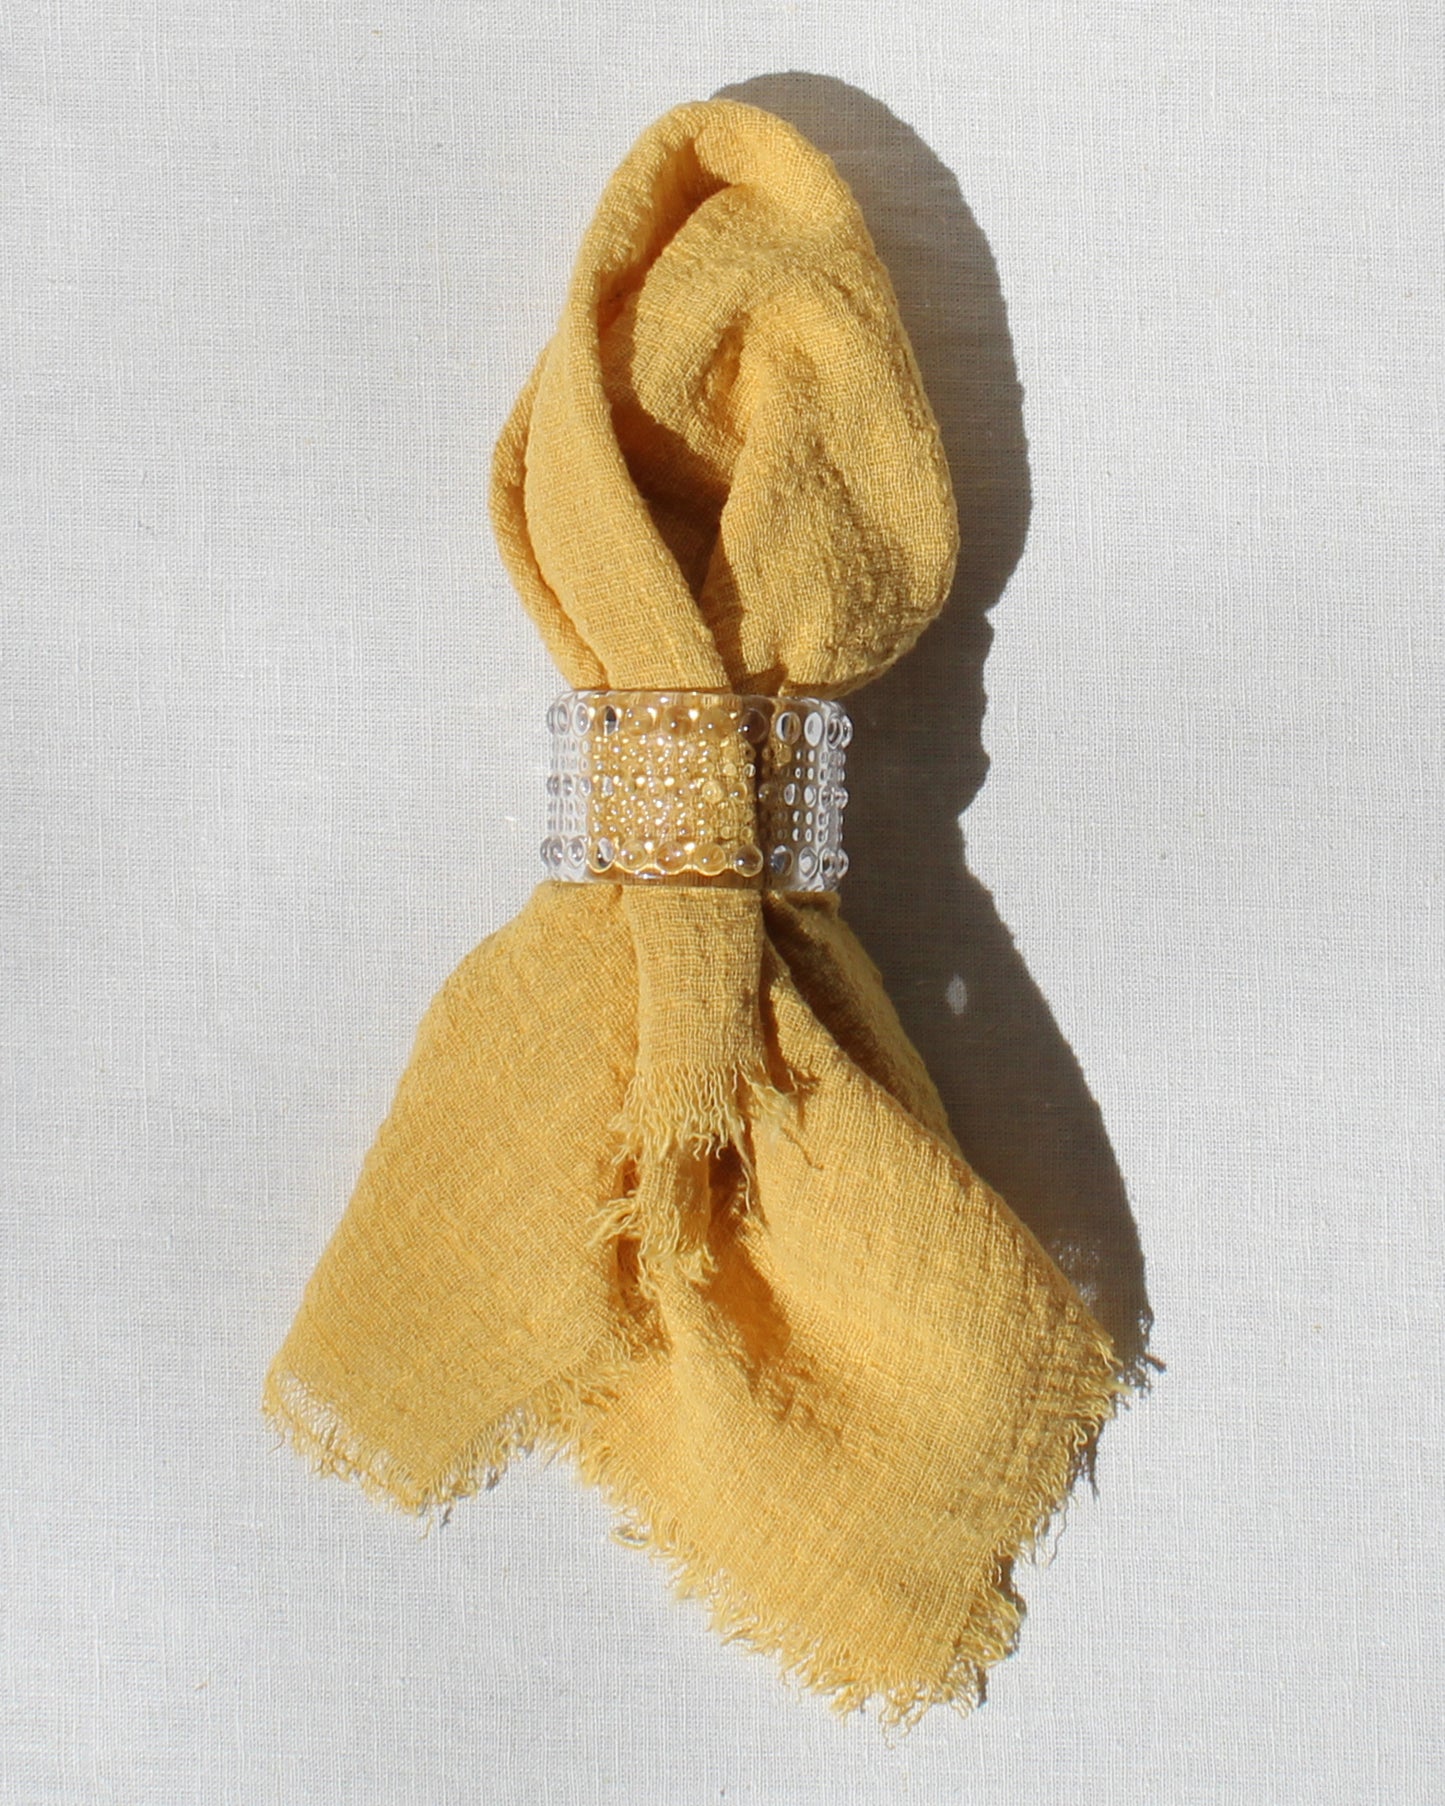 9 CHRISTOPHER Washed Linen Napkin in Mustard